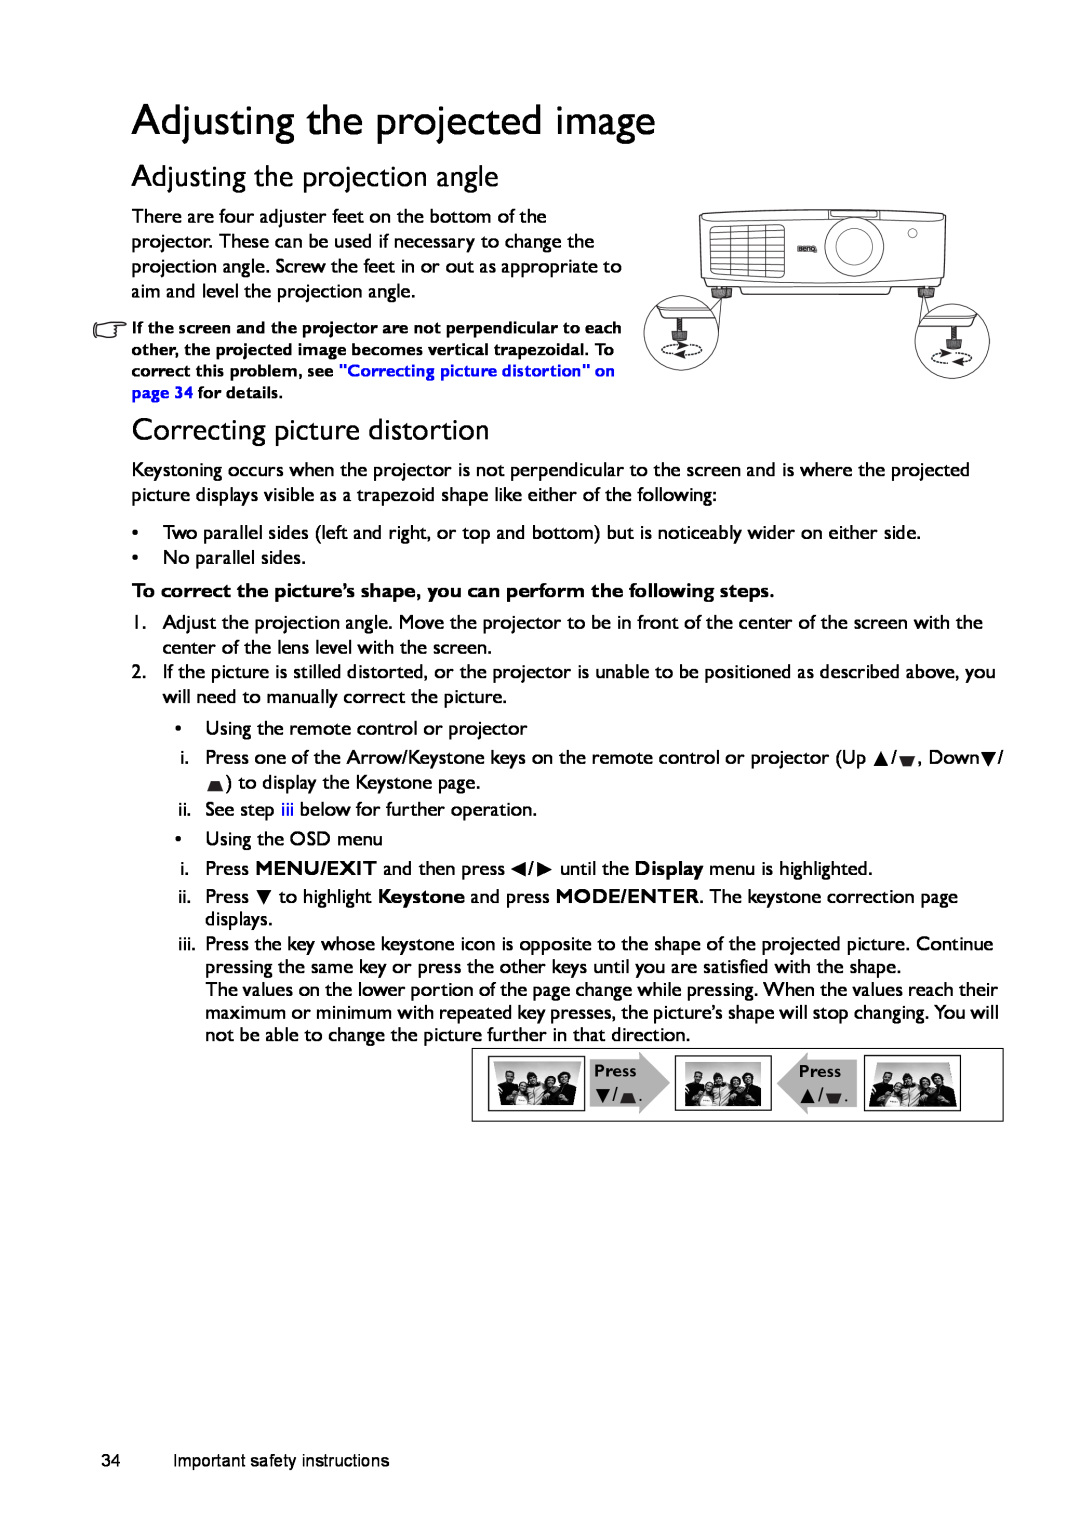 BenQ W1500 user manual Adjusting the projected image, Adjusting the projection angle, Correcting picture distortion 